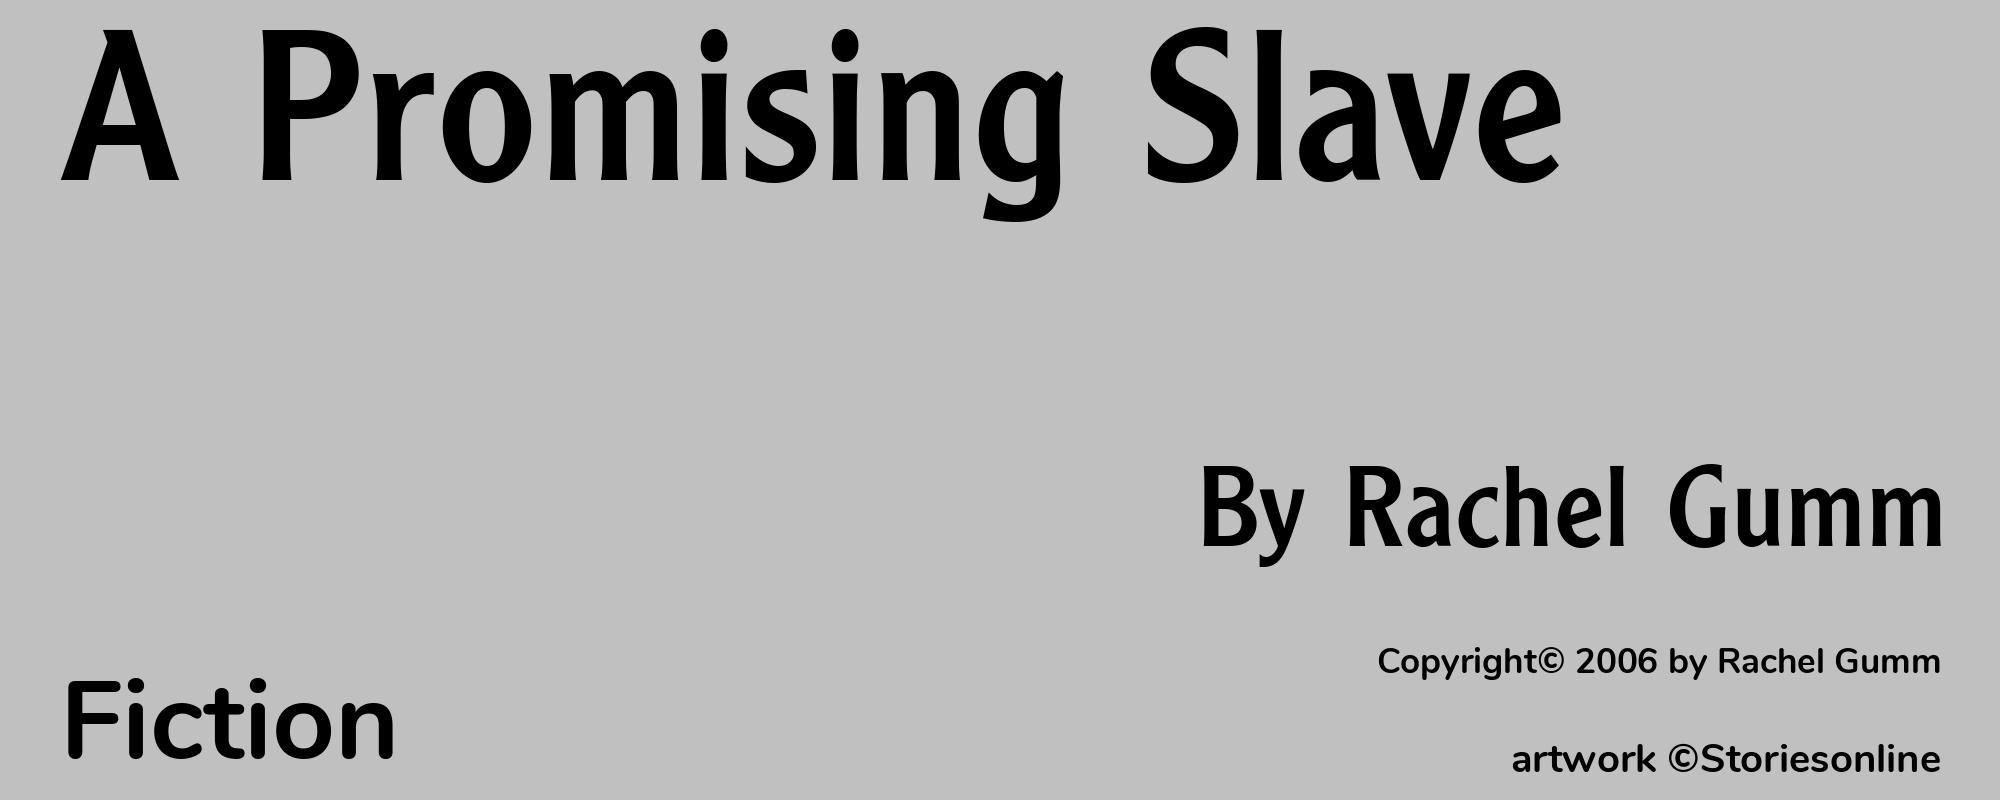 A Promising Slave - Cover